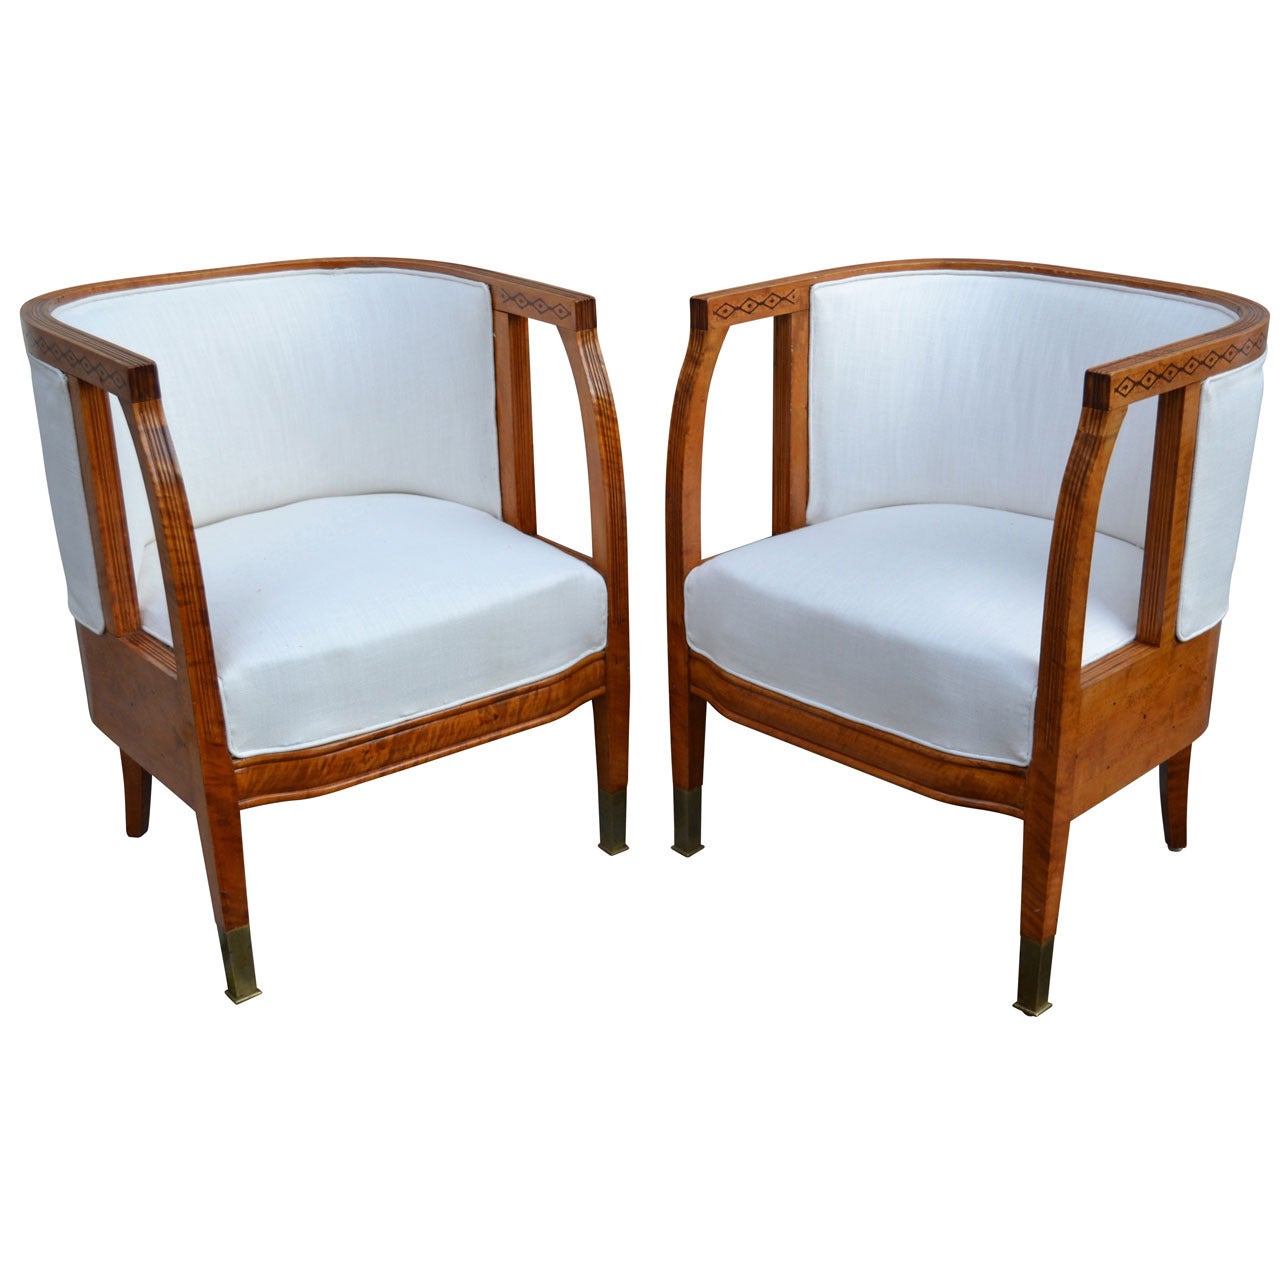 Pair of Excellent 20th Century Swedish Birchwood Chairs